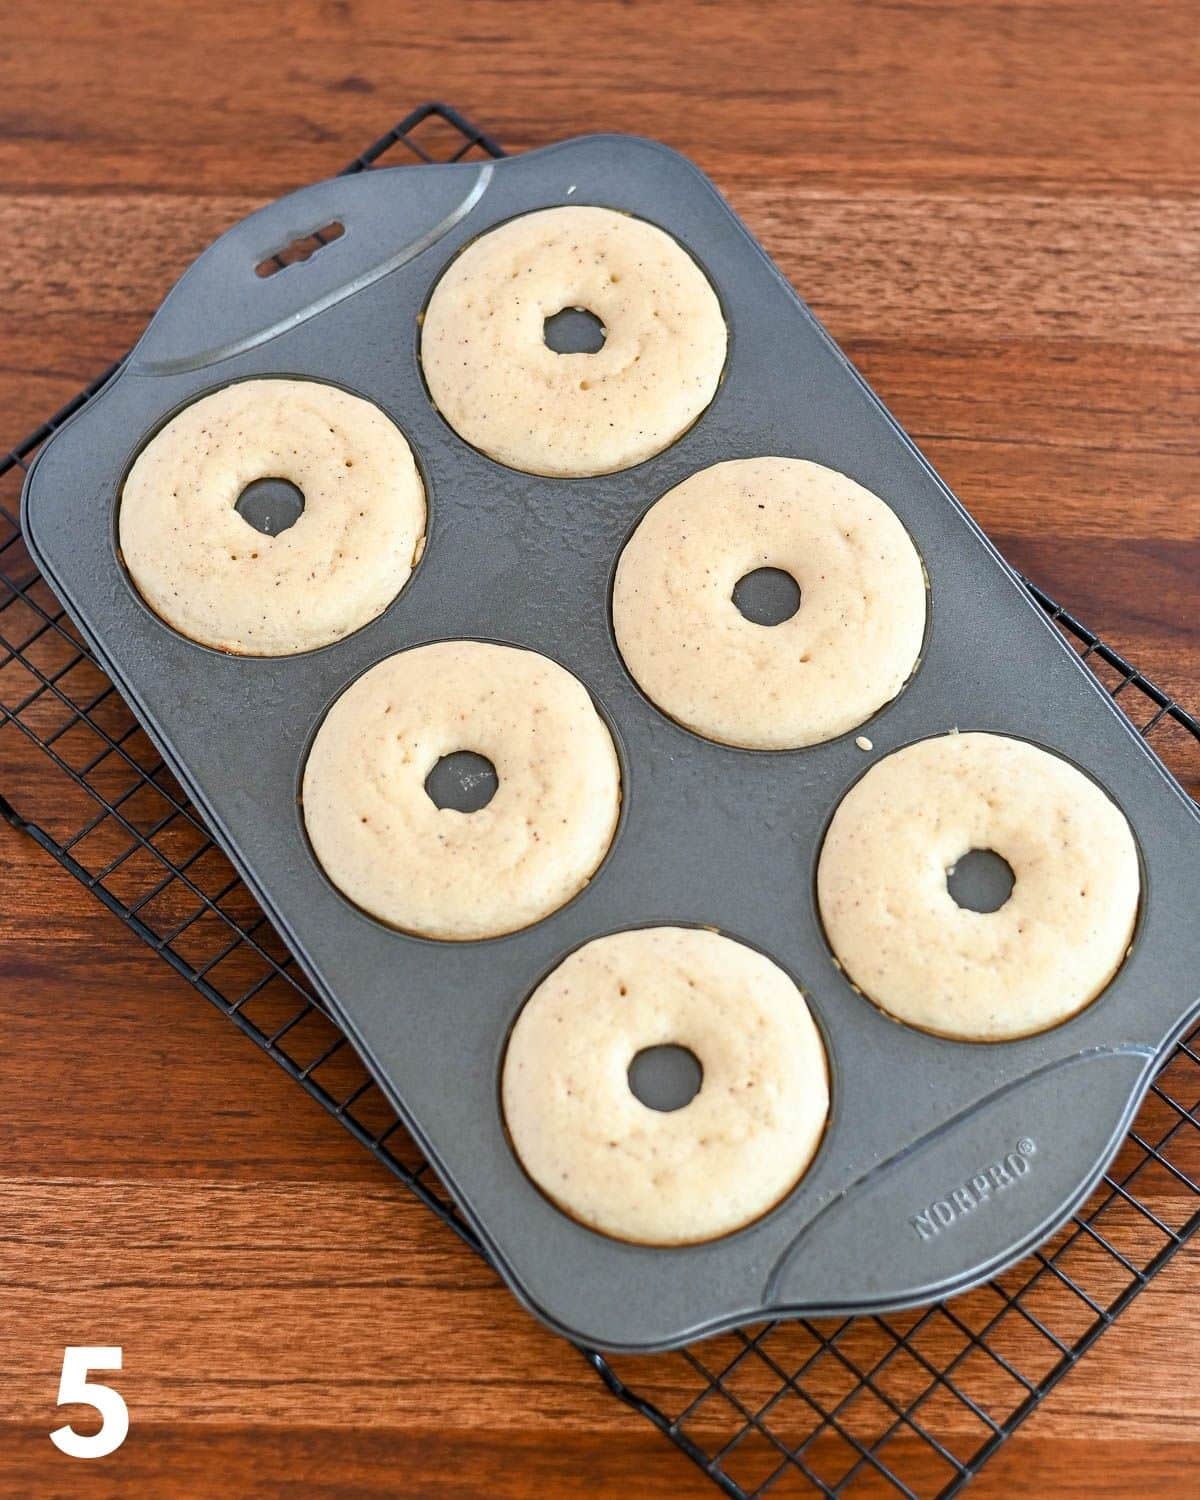 Just baked donuts still in a donut pan. 